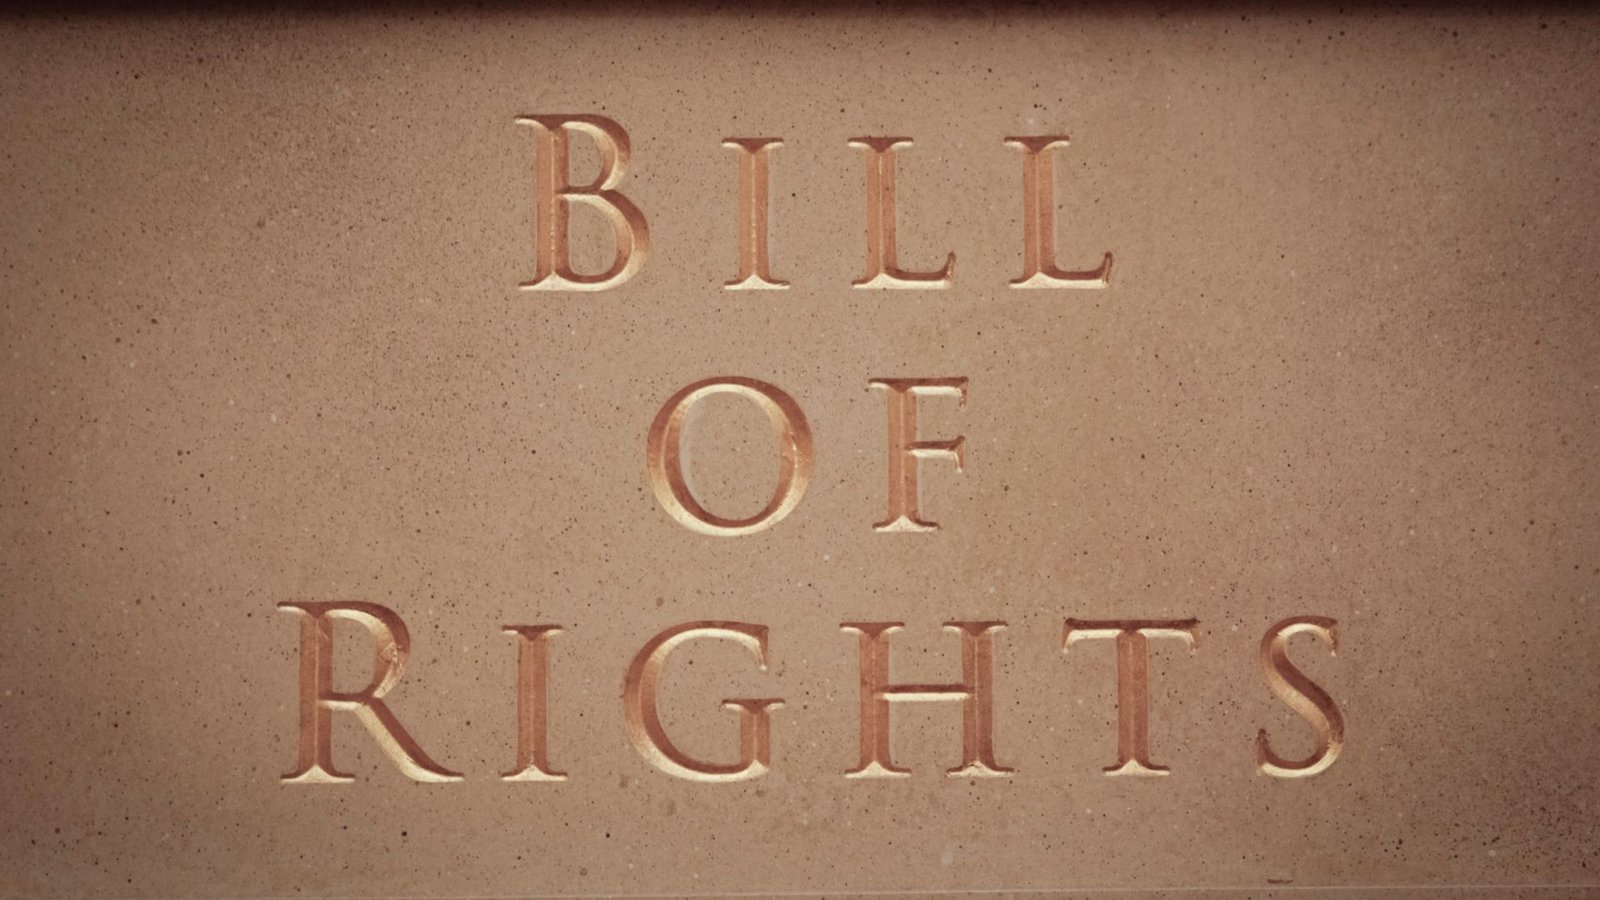 The Bill of Rights 1689, Lawforeverything